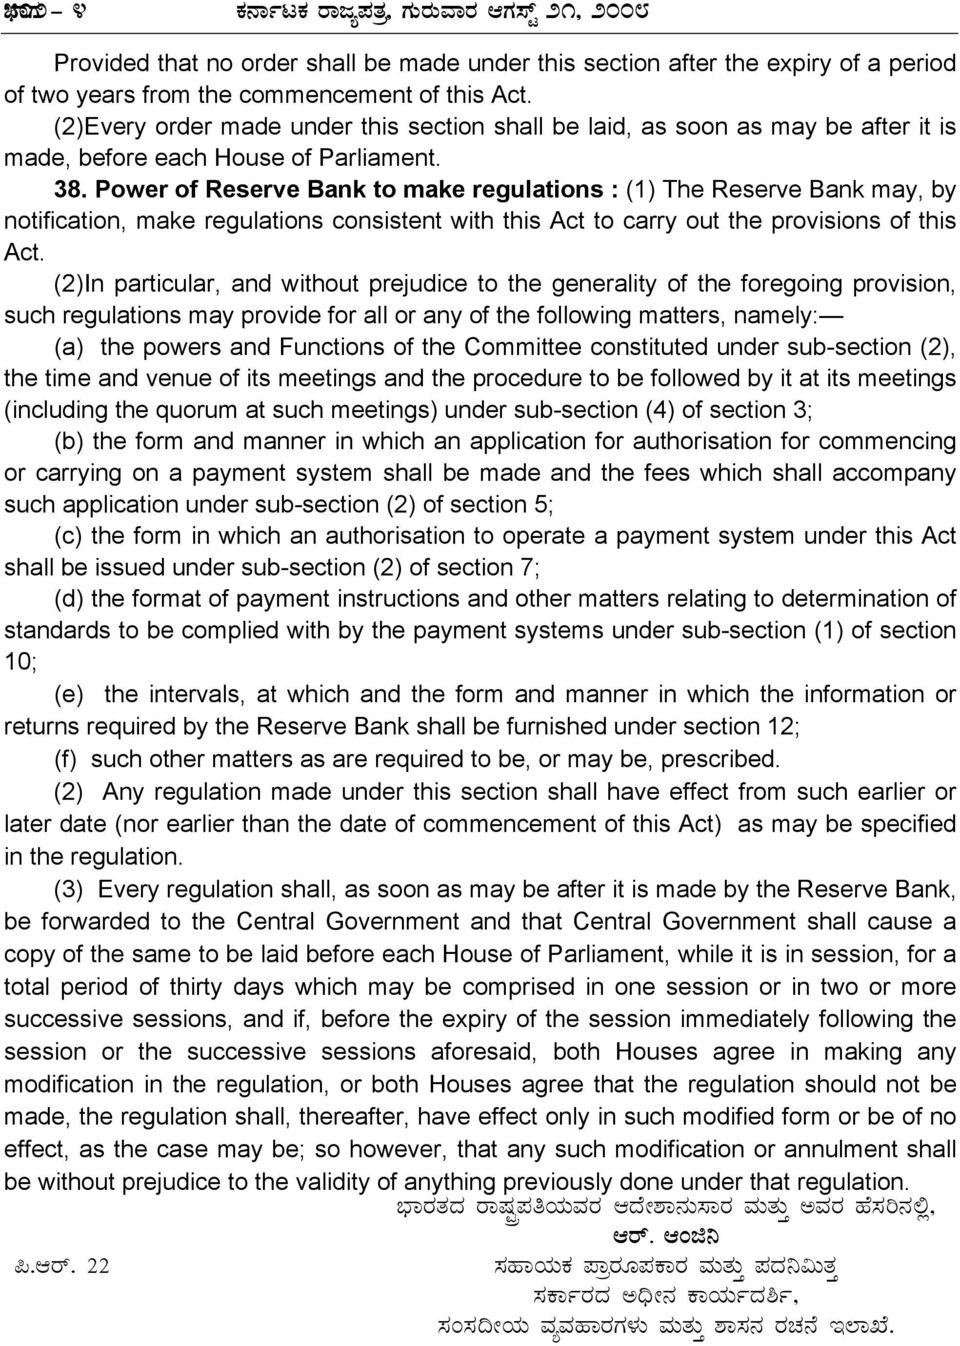 Power of Reserve Bank to make regulations : (1) The Reserve Bank may, by notification, make regulations consistent with this Act to carry out the provisions of this Act.